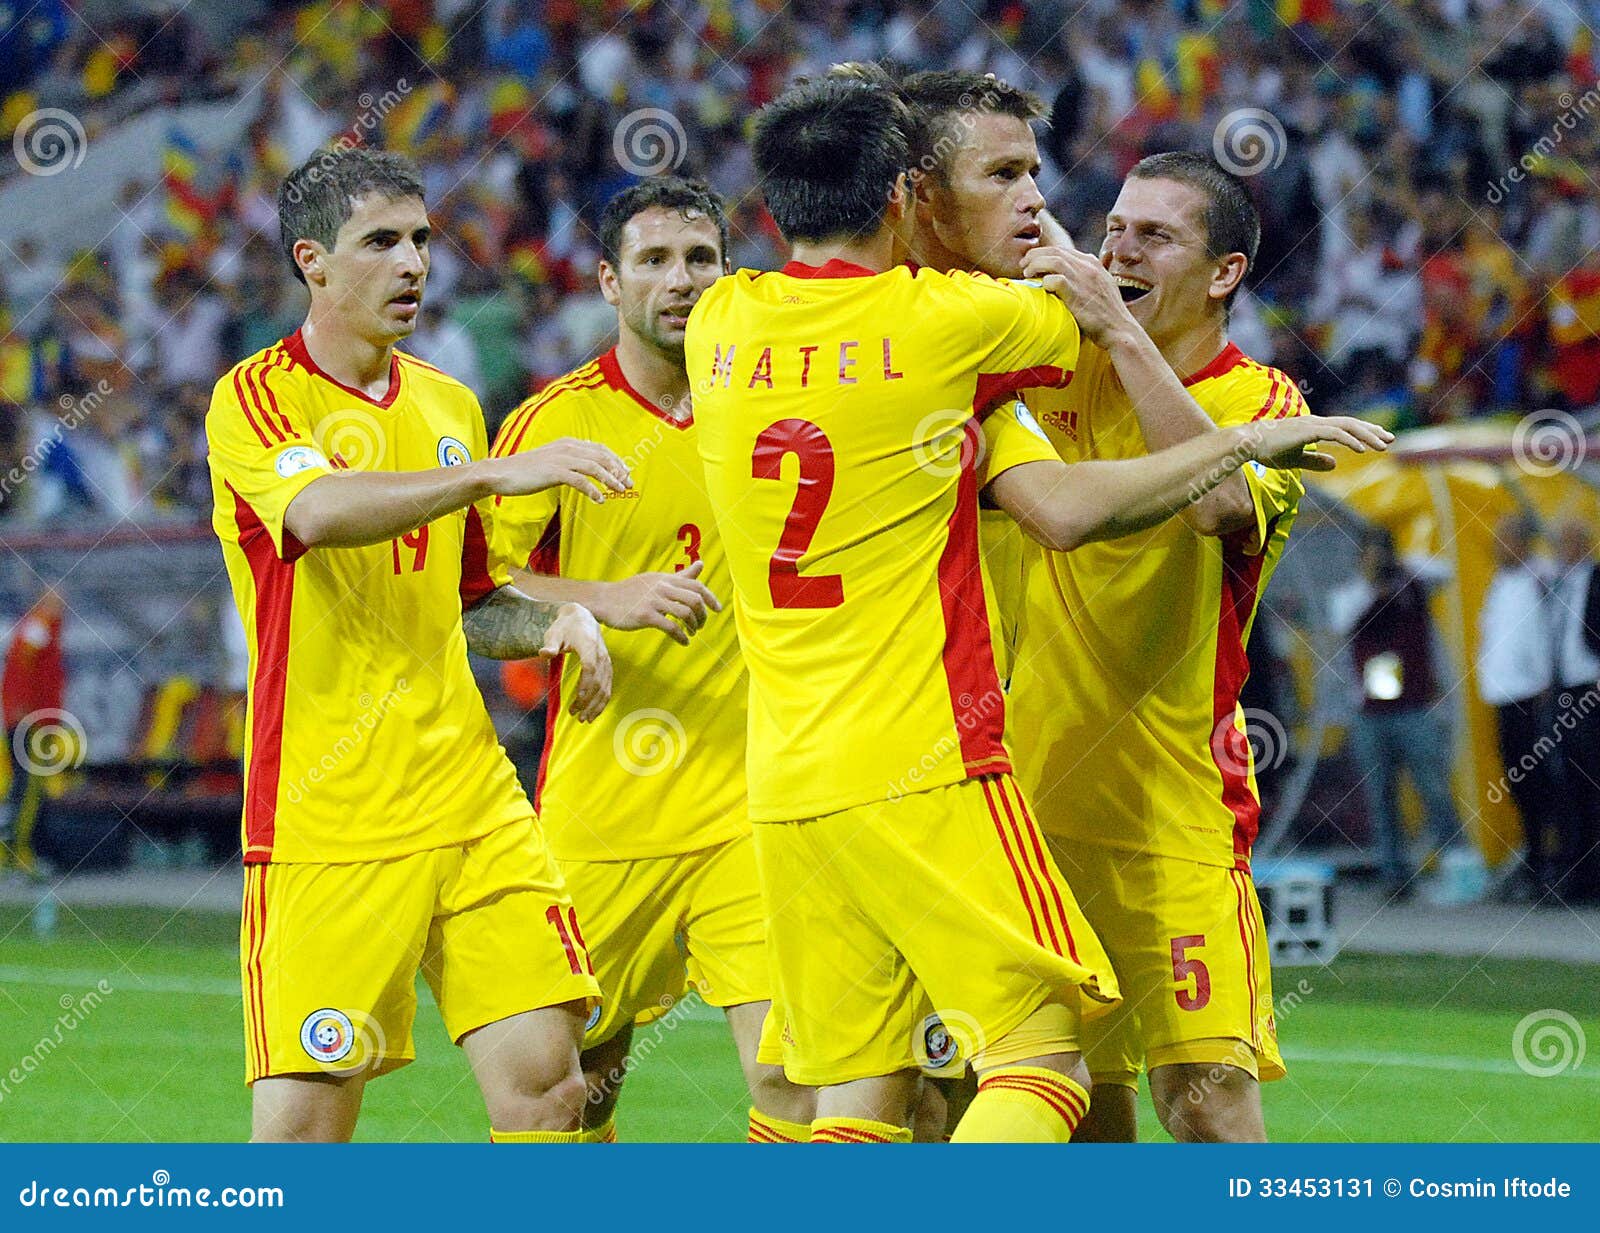 Players of FCSB celebrating after they scored a goal during Romania News  Photo - Getty Images